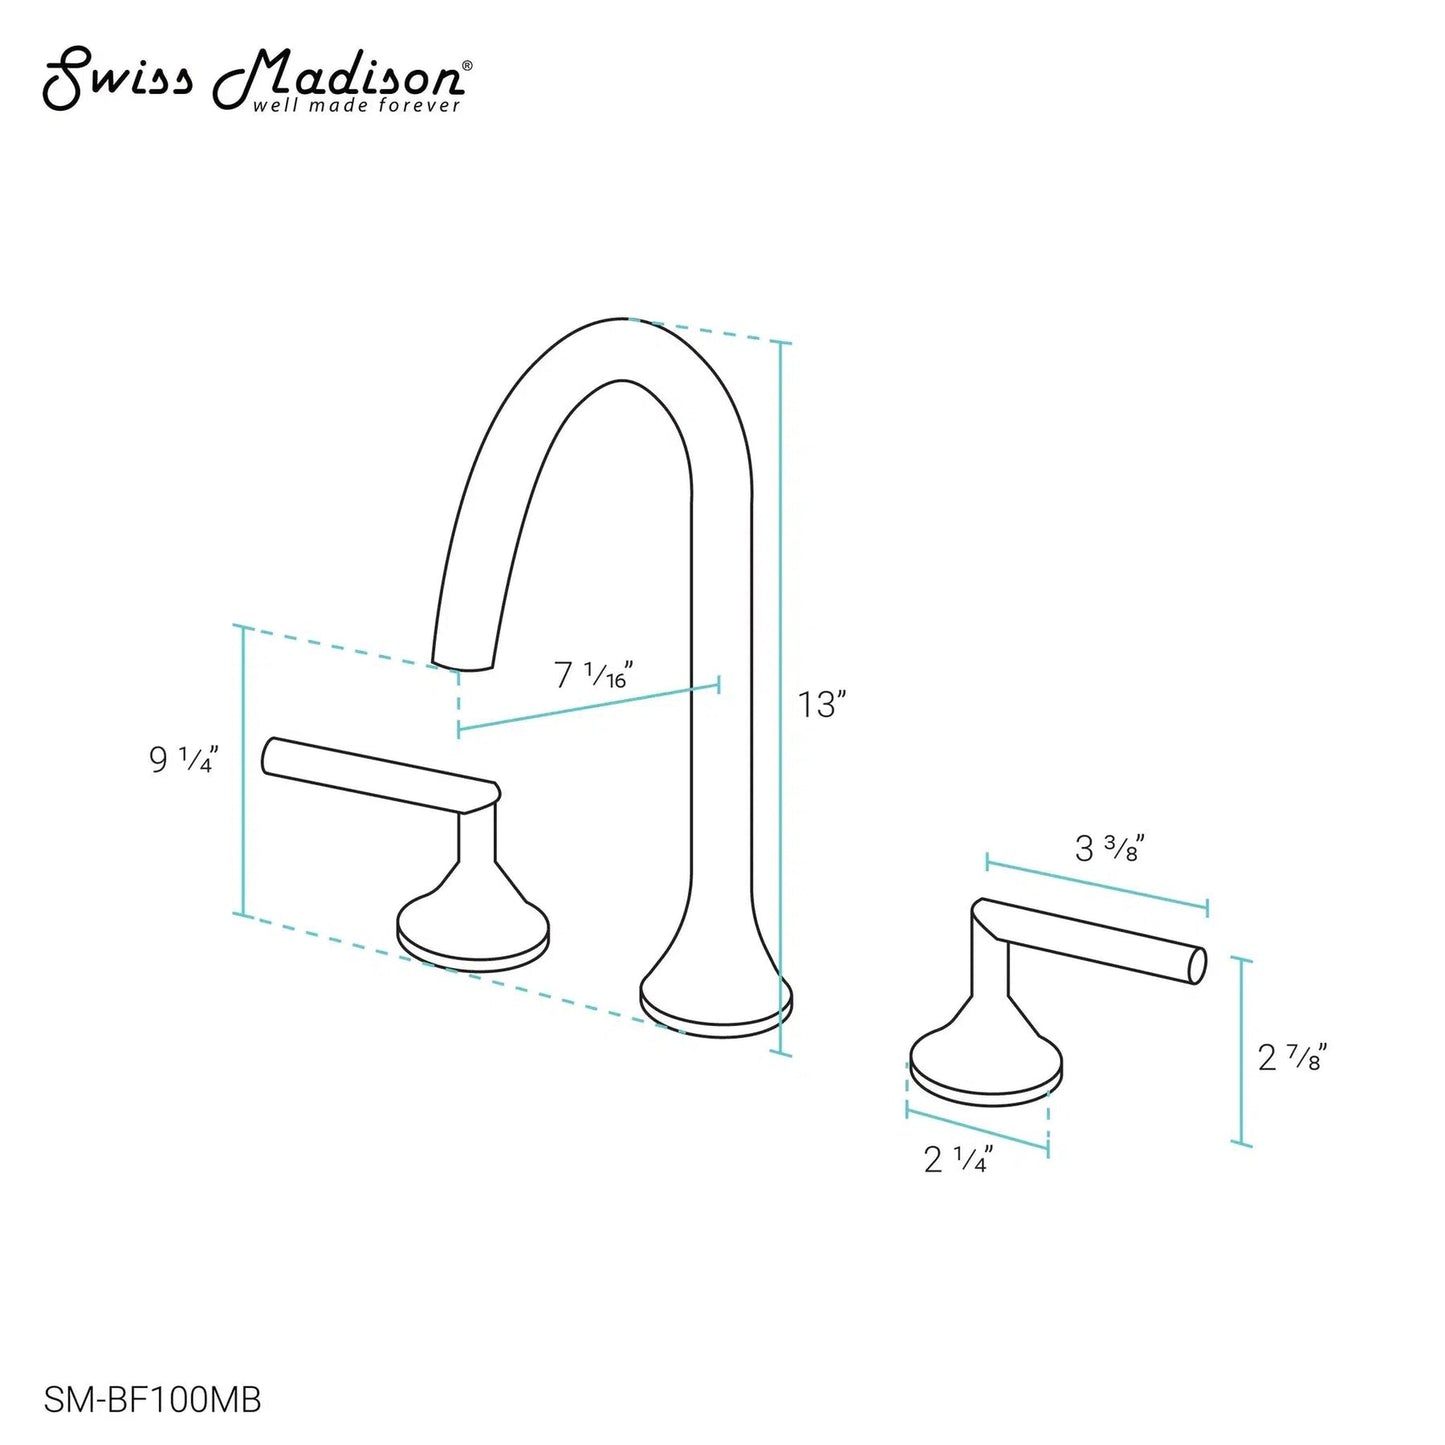 Swiss Madison Daxton 8" Matte Black Widespread Bathroom Faucet With Bar Handles and 1.2 GPM Flow Rate